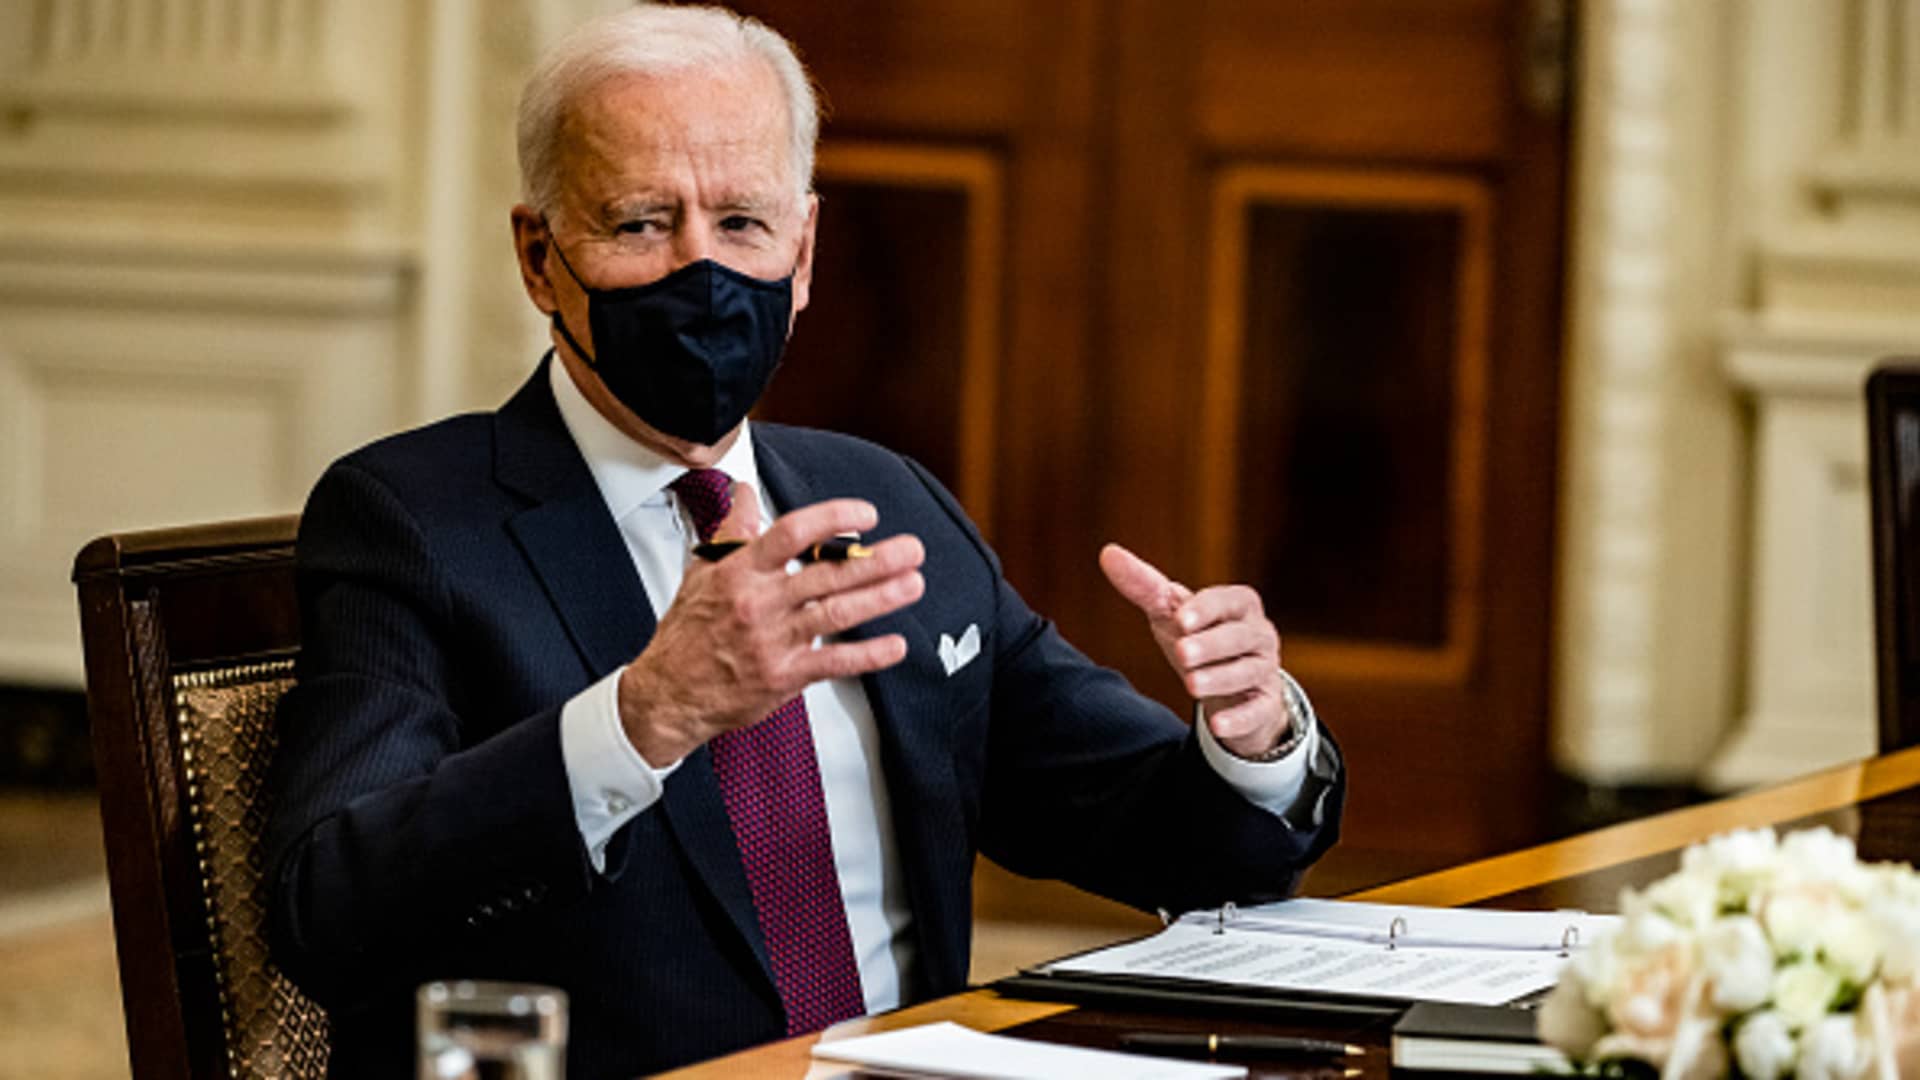 U.S. President Joe Biden speaks during a roundtable meeting with Americans who will benefit from the COVID-19 pandemic relief checks that are a part of the American Rescue Plan on March 5, 2021 in Washington, DC.